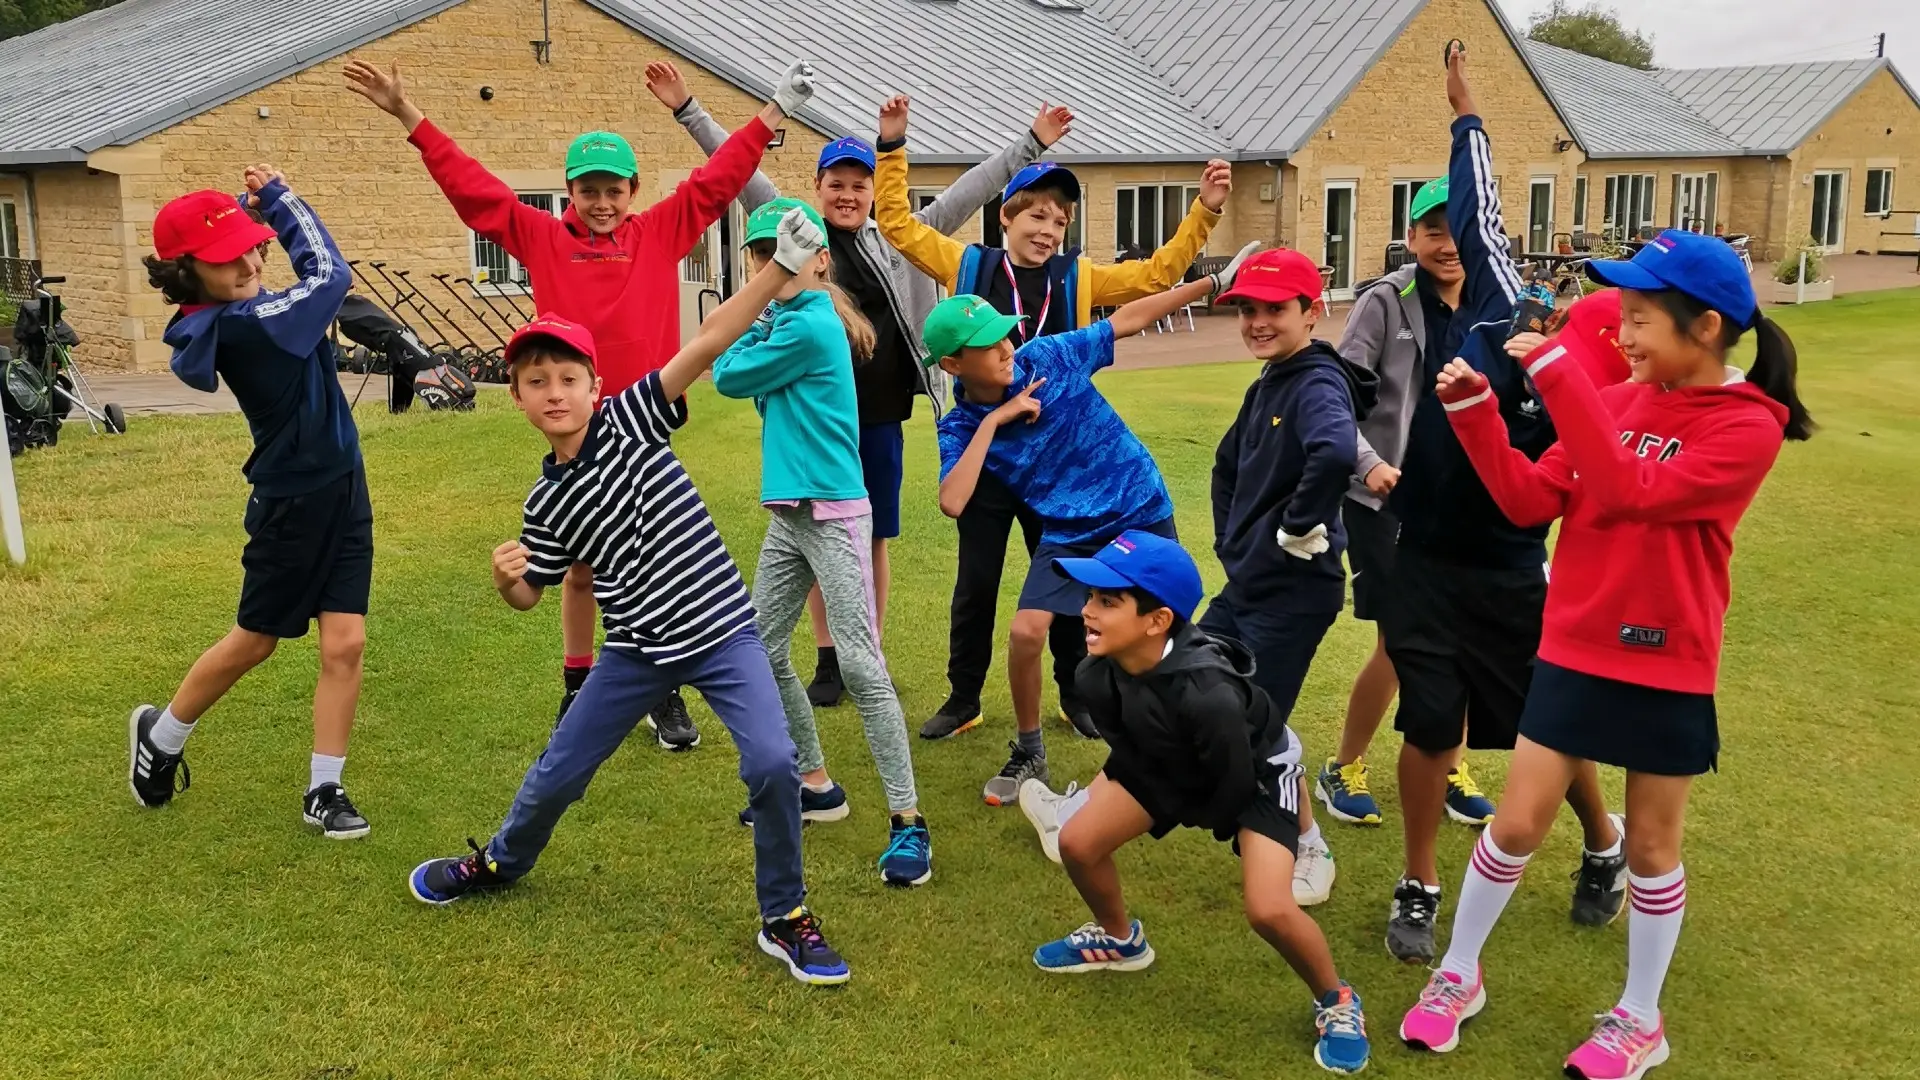 school holiday golf camps at Burghley Park Golf Club.